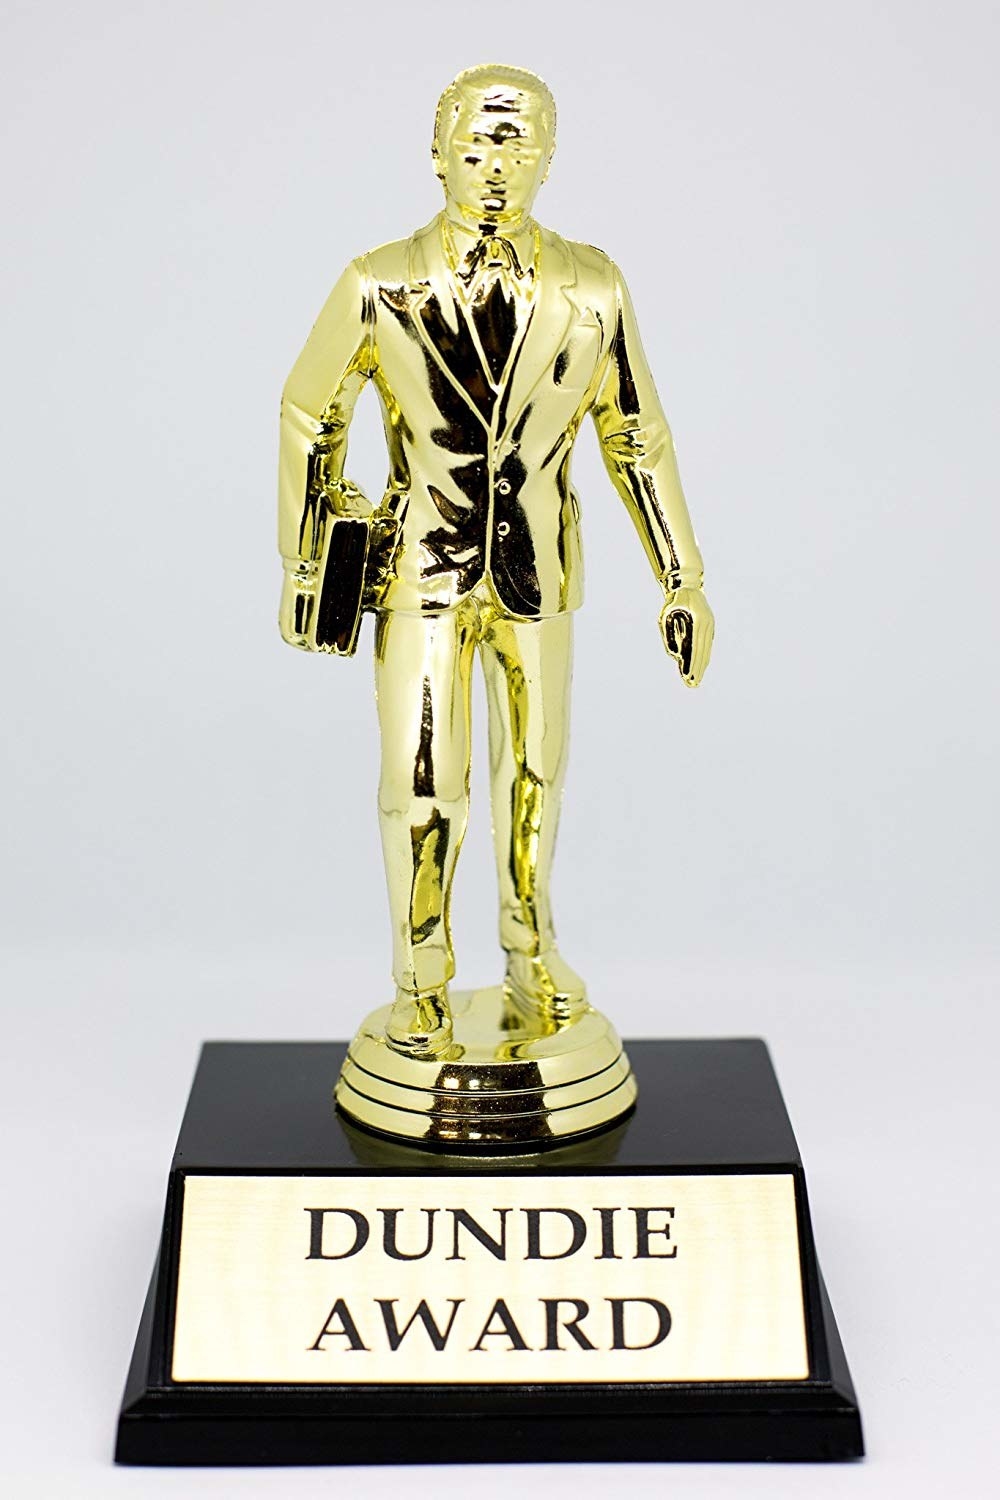 The golden Dundie trophy with the text &quot;DUNDIE AWARD&quot; on the base